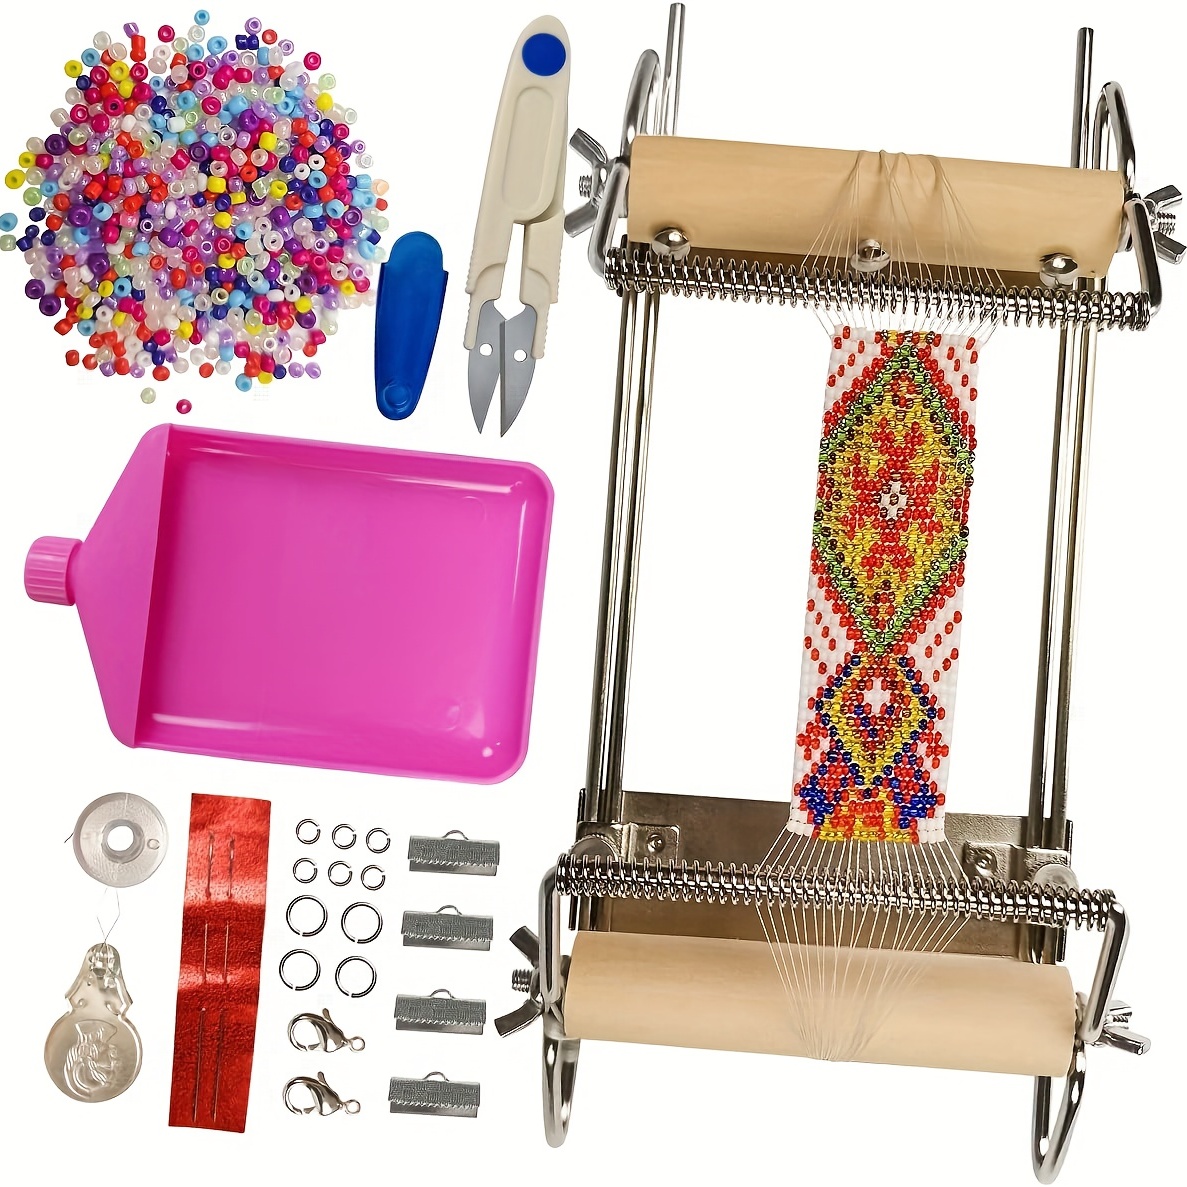 An Upright Bead Loom Making It Easier for Those Who Find A Flat